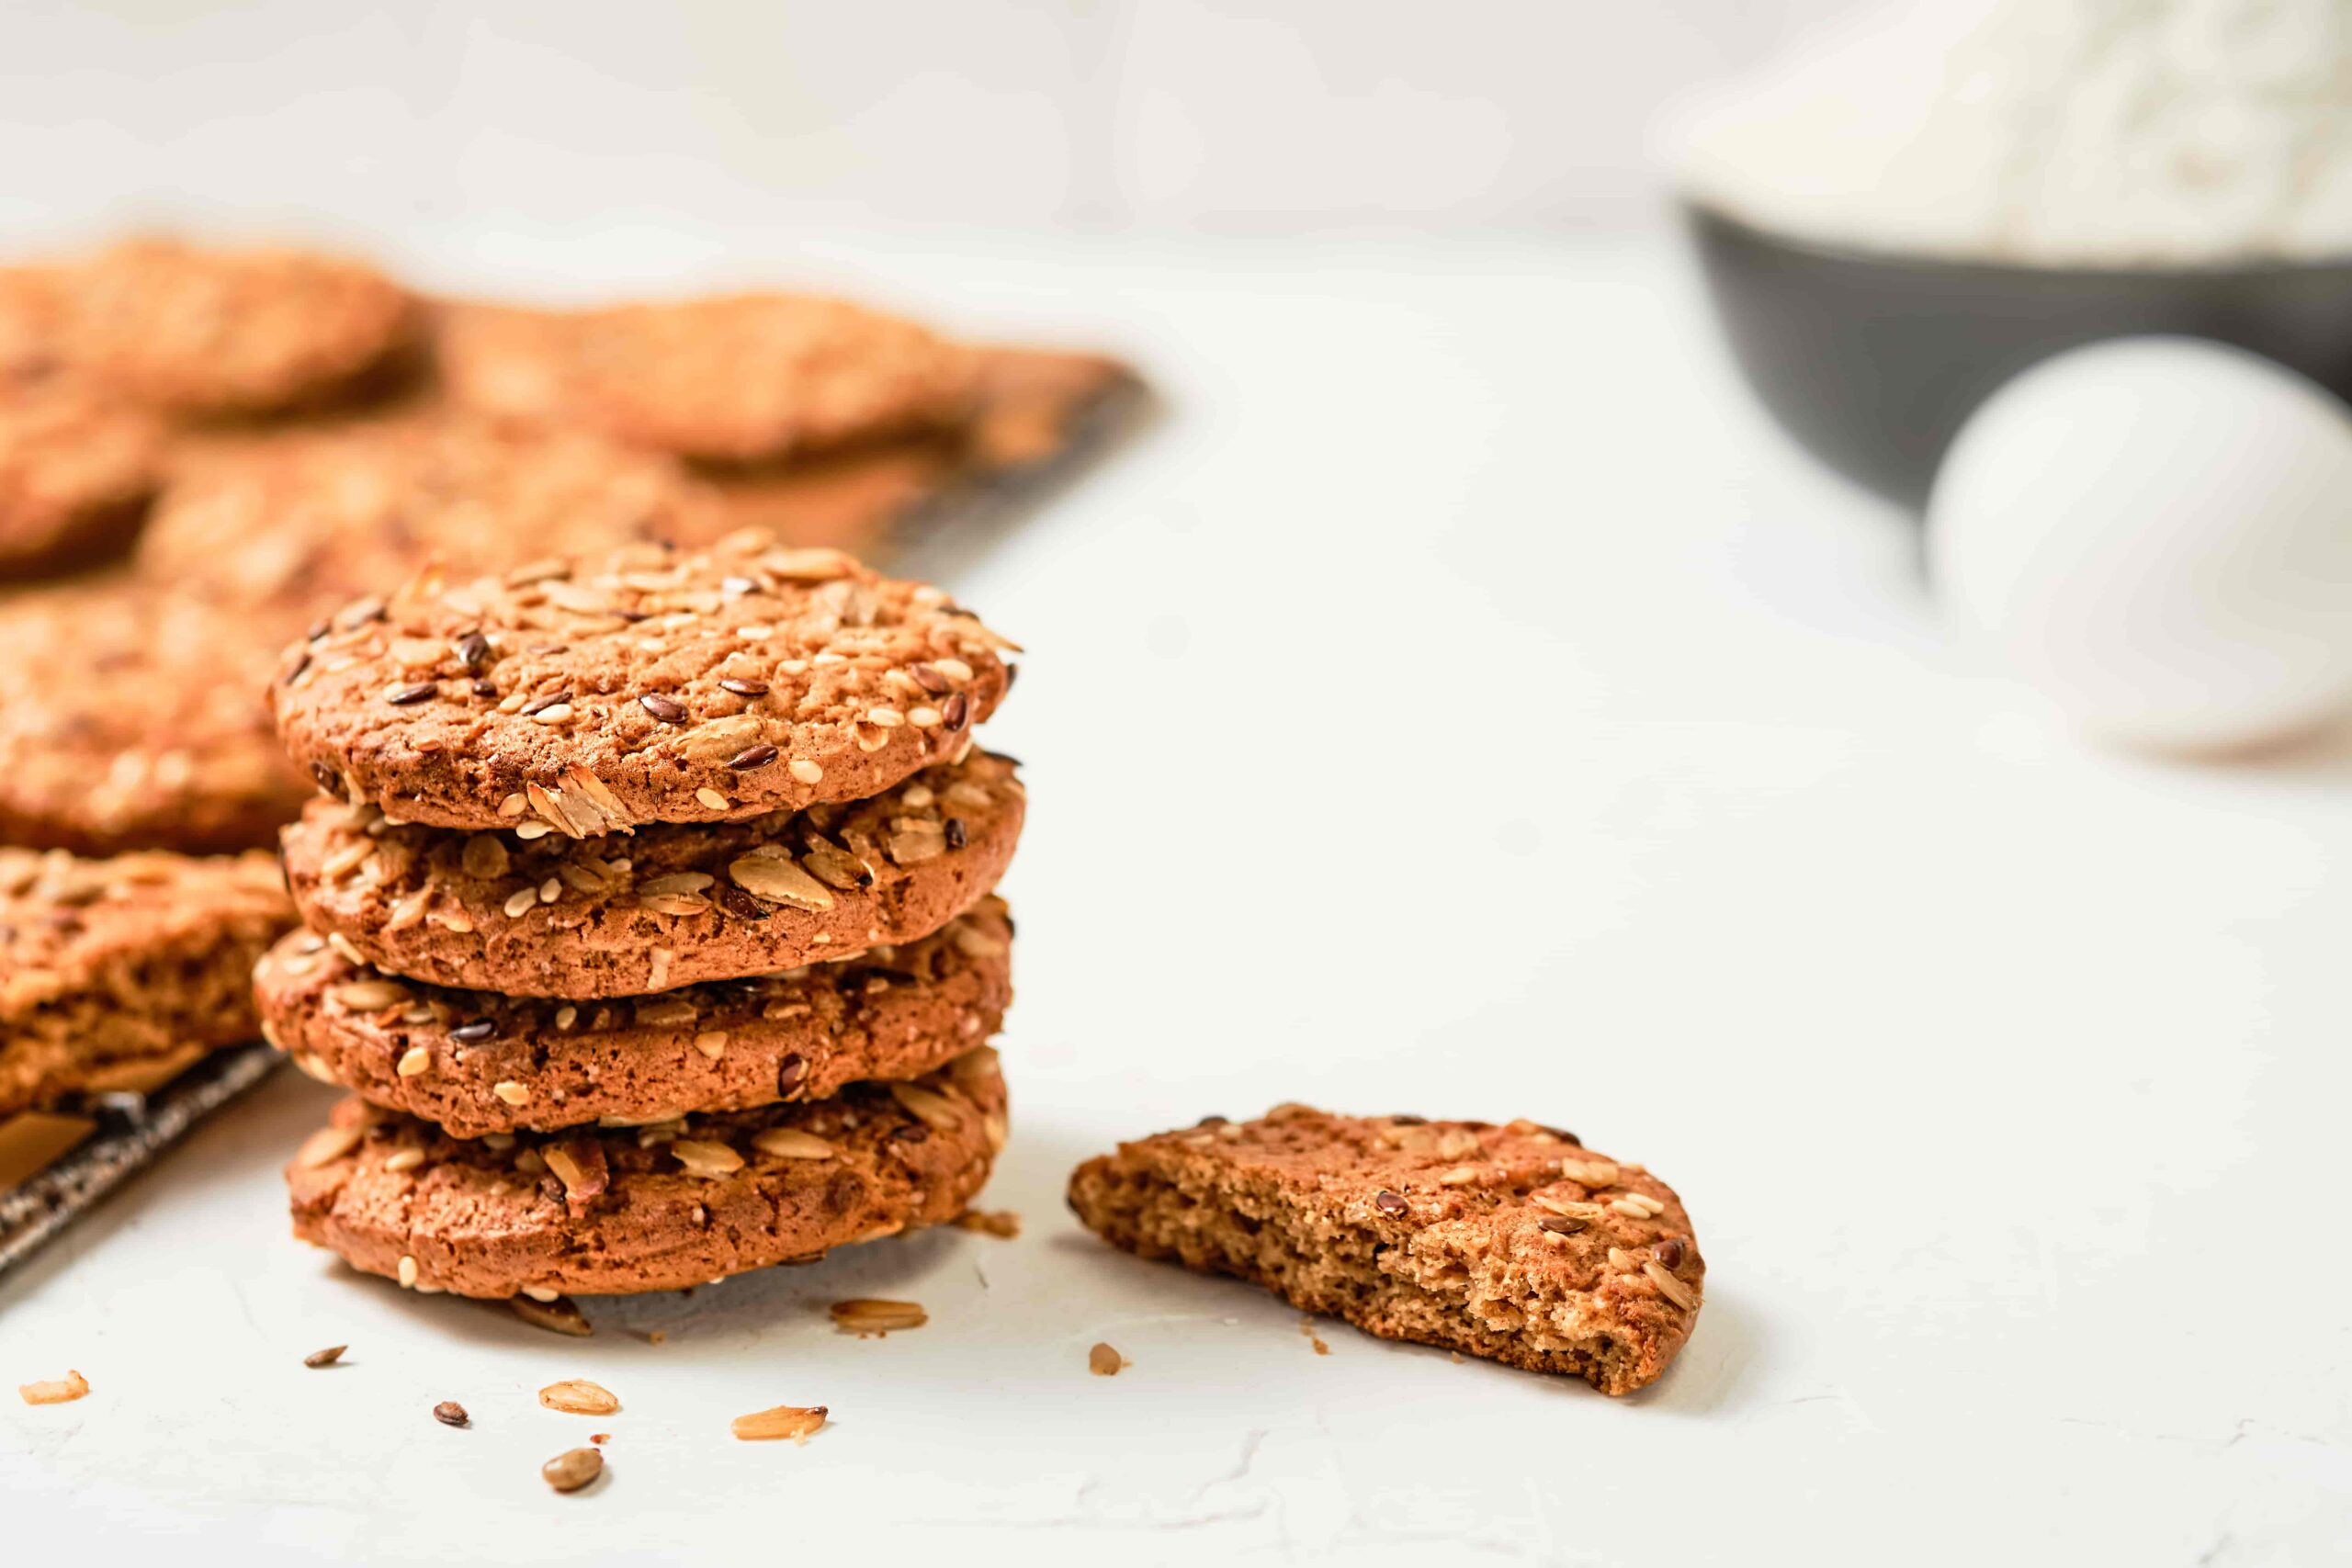 Oatmeal cookies with flax and sesame seeds on a white background. Eggs, flour - ingredients for making cookies, baking recipe. Selective focus on baked cookies, healthy breakfast. Festive baked goods